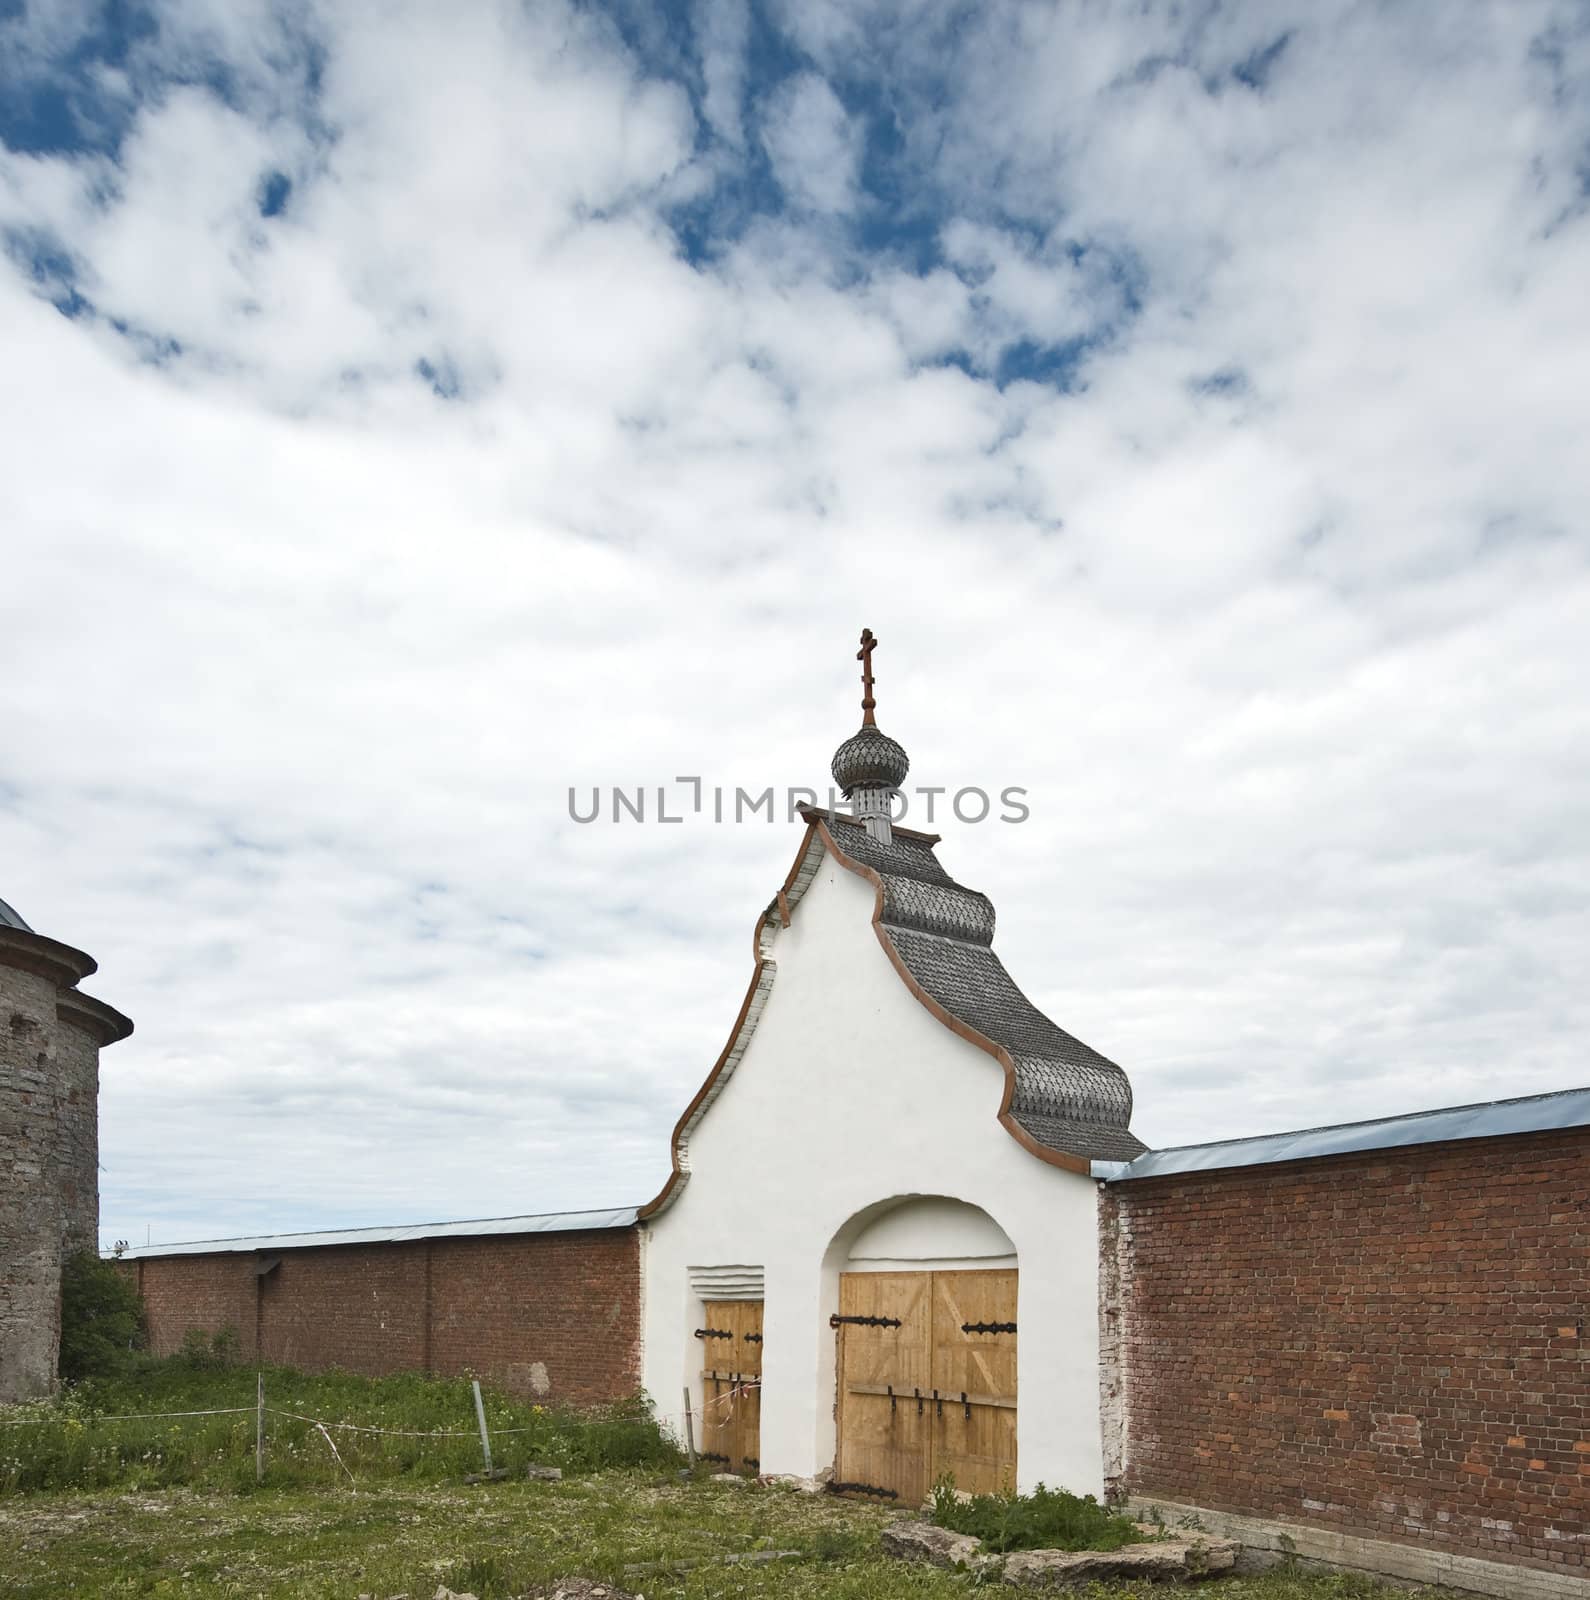 Old enter gates to monastery with onion dome and cross on the top